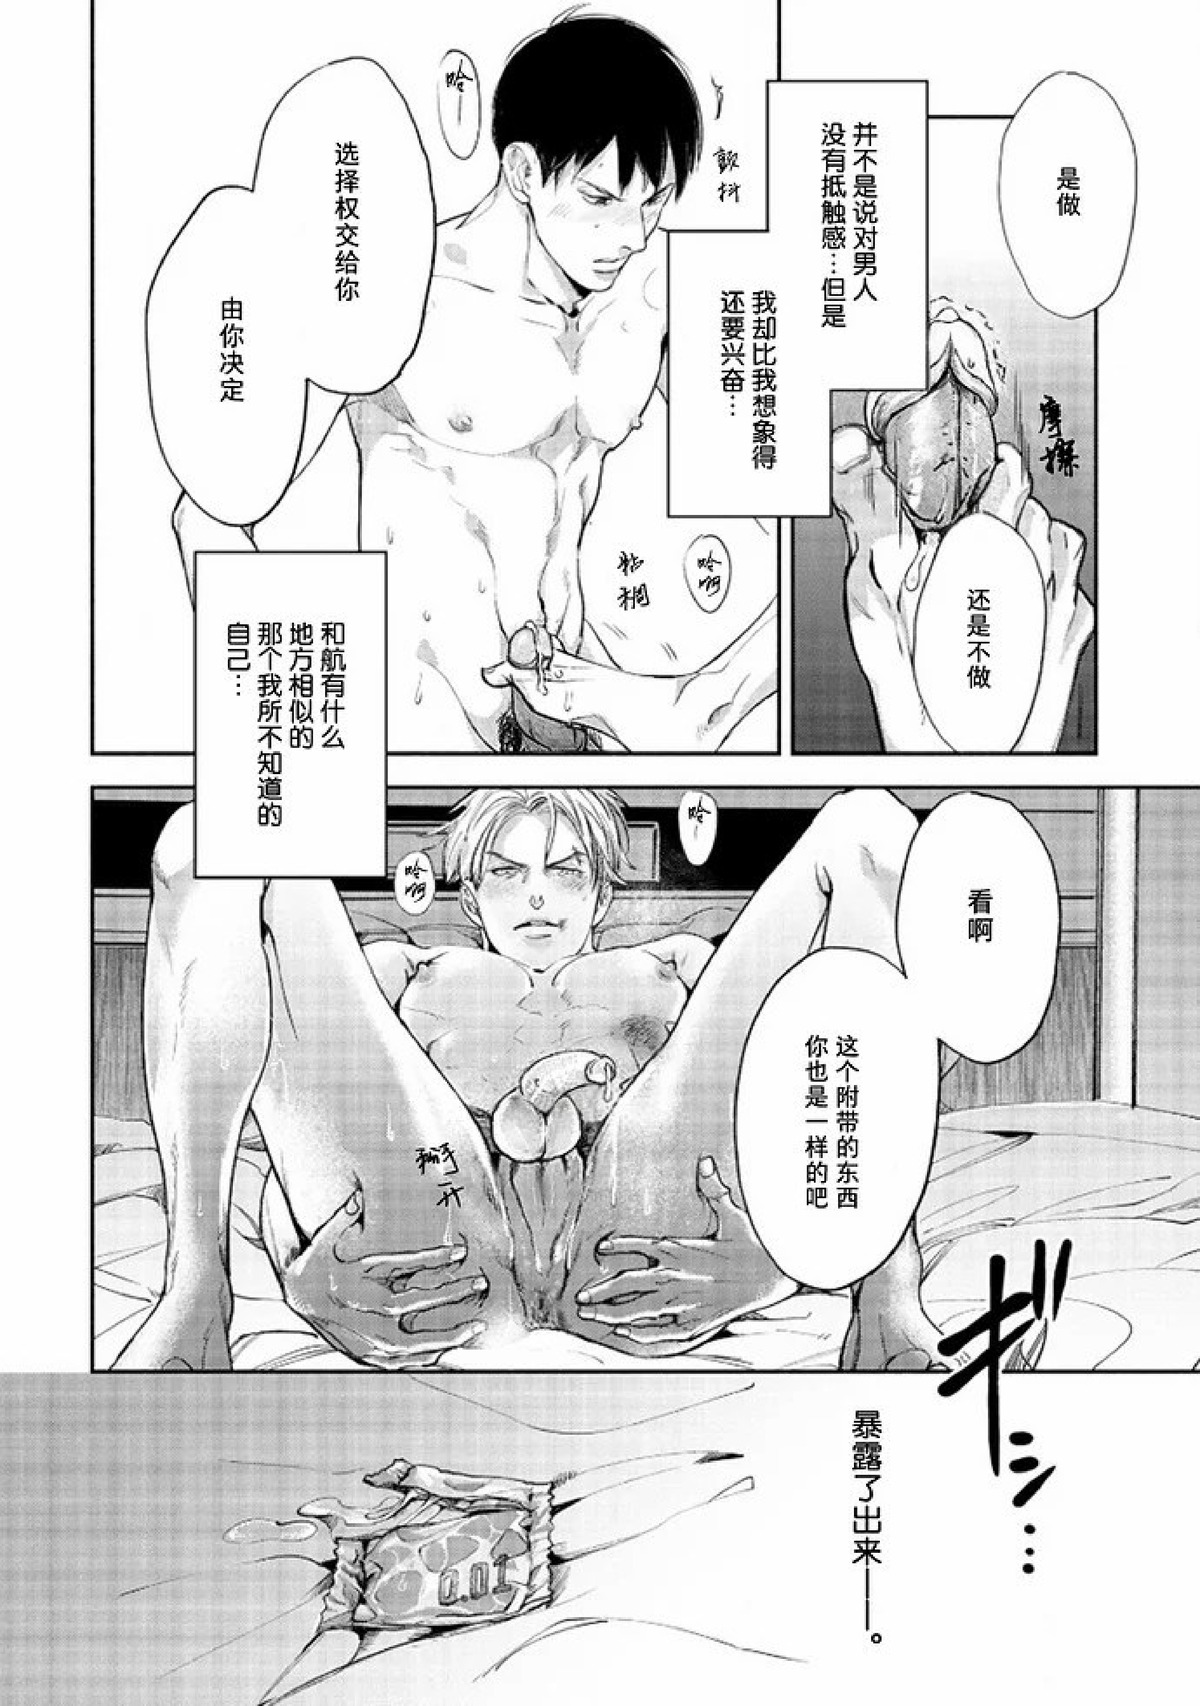 【Two sides of the same coin[腐漫]】漫画-（上卷01-02）章节漫画下拉式图片-98.jpg